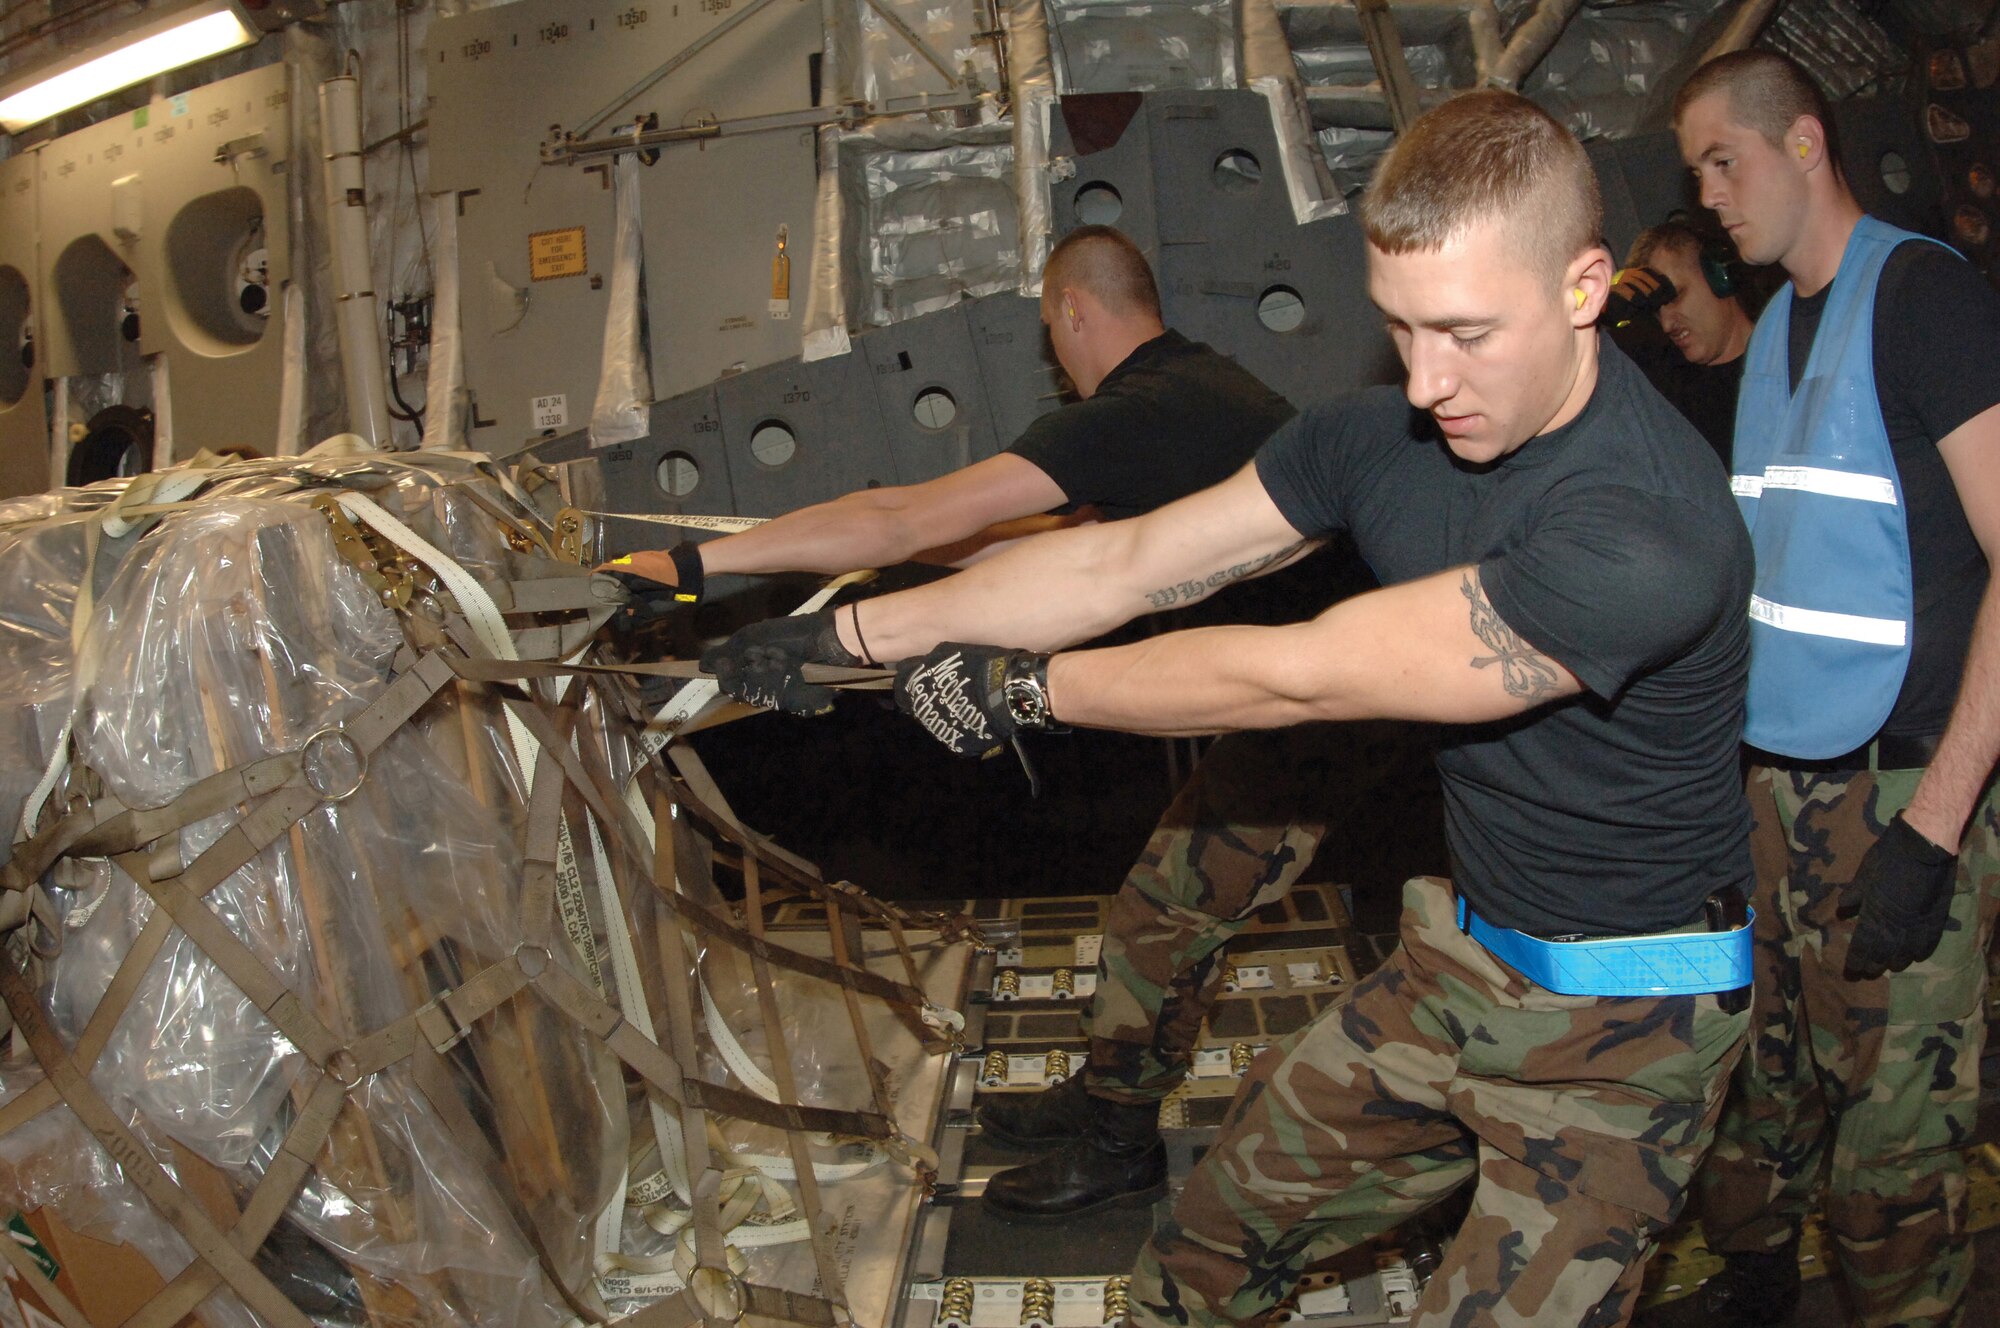 Senior Airman John W. Smith, right, 728th Air Mobility Squadron aerial porter, loads palletes onto a C-17 Globemaster III with the aid of Tech. Sgt. Tom House, 728th AMS aircraft loadmaster. Risk management can range from wearing protective gloves and reflective belts to assessing the risk of moving the exact amount of cargo on any mission. Risk management should be executed during every activity. (U.S. Air Force photo by Master Sgt. Bill Gomez.)